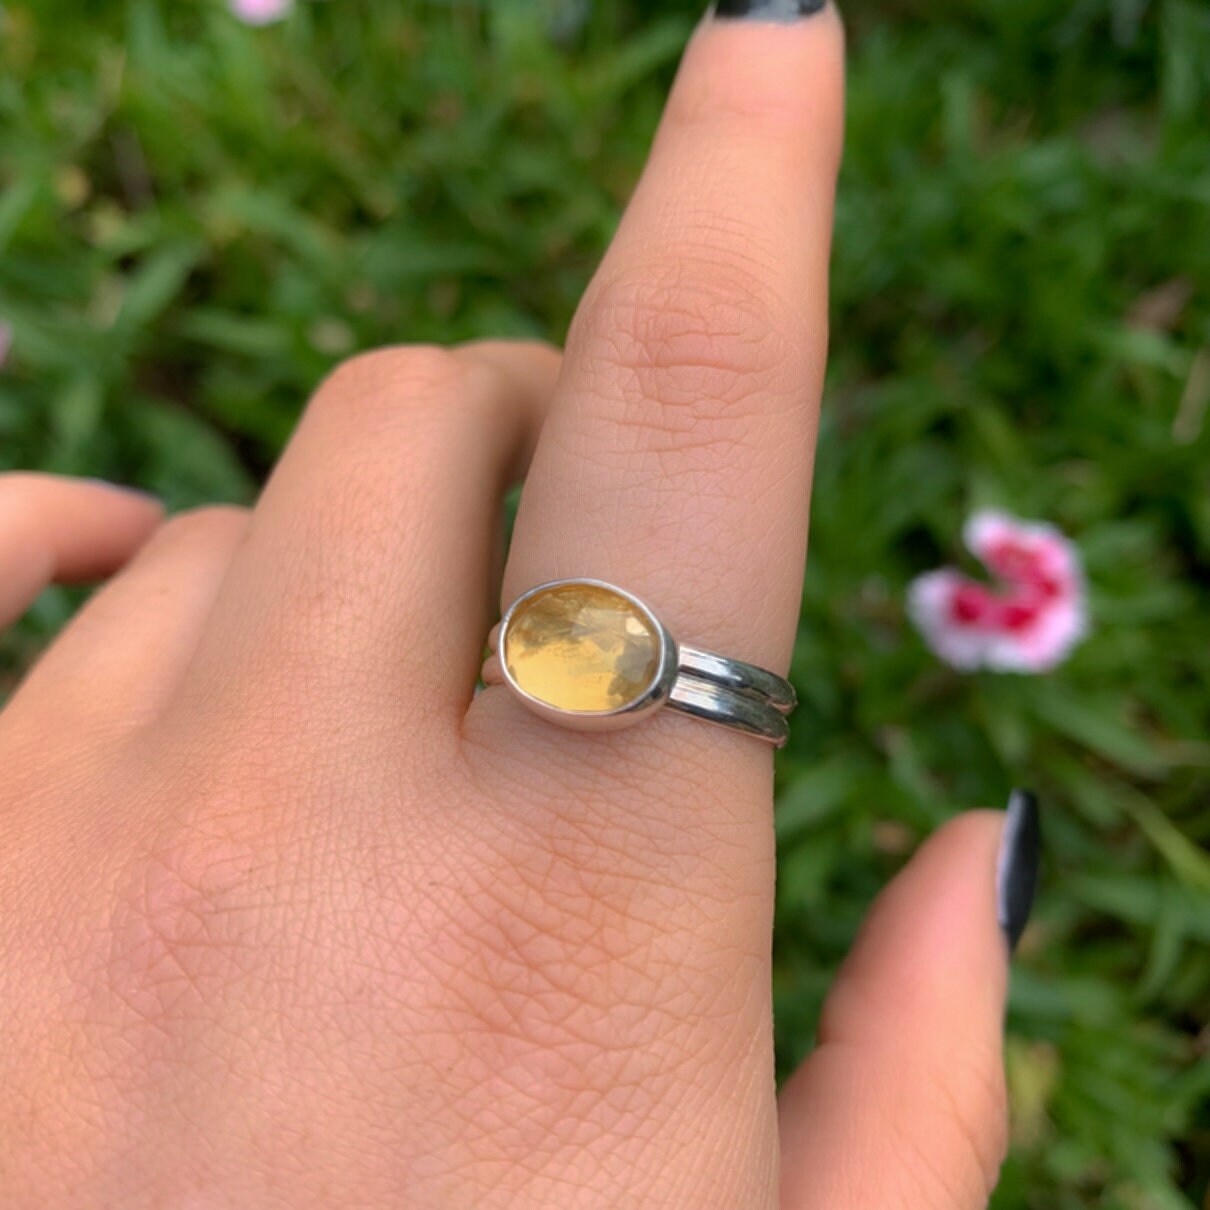 Rose Cut Citrine Ring - Size 9 - Sterling Silver - Faceted Citrine Jewelry - Dainty Citrine Jewellery - Citrine Thick Band Ring. Double Band